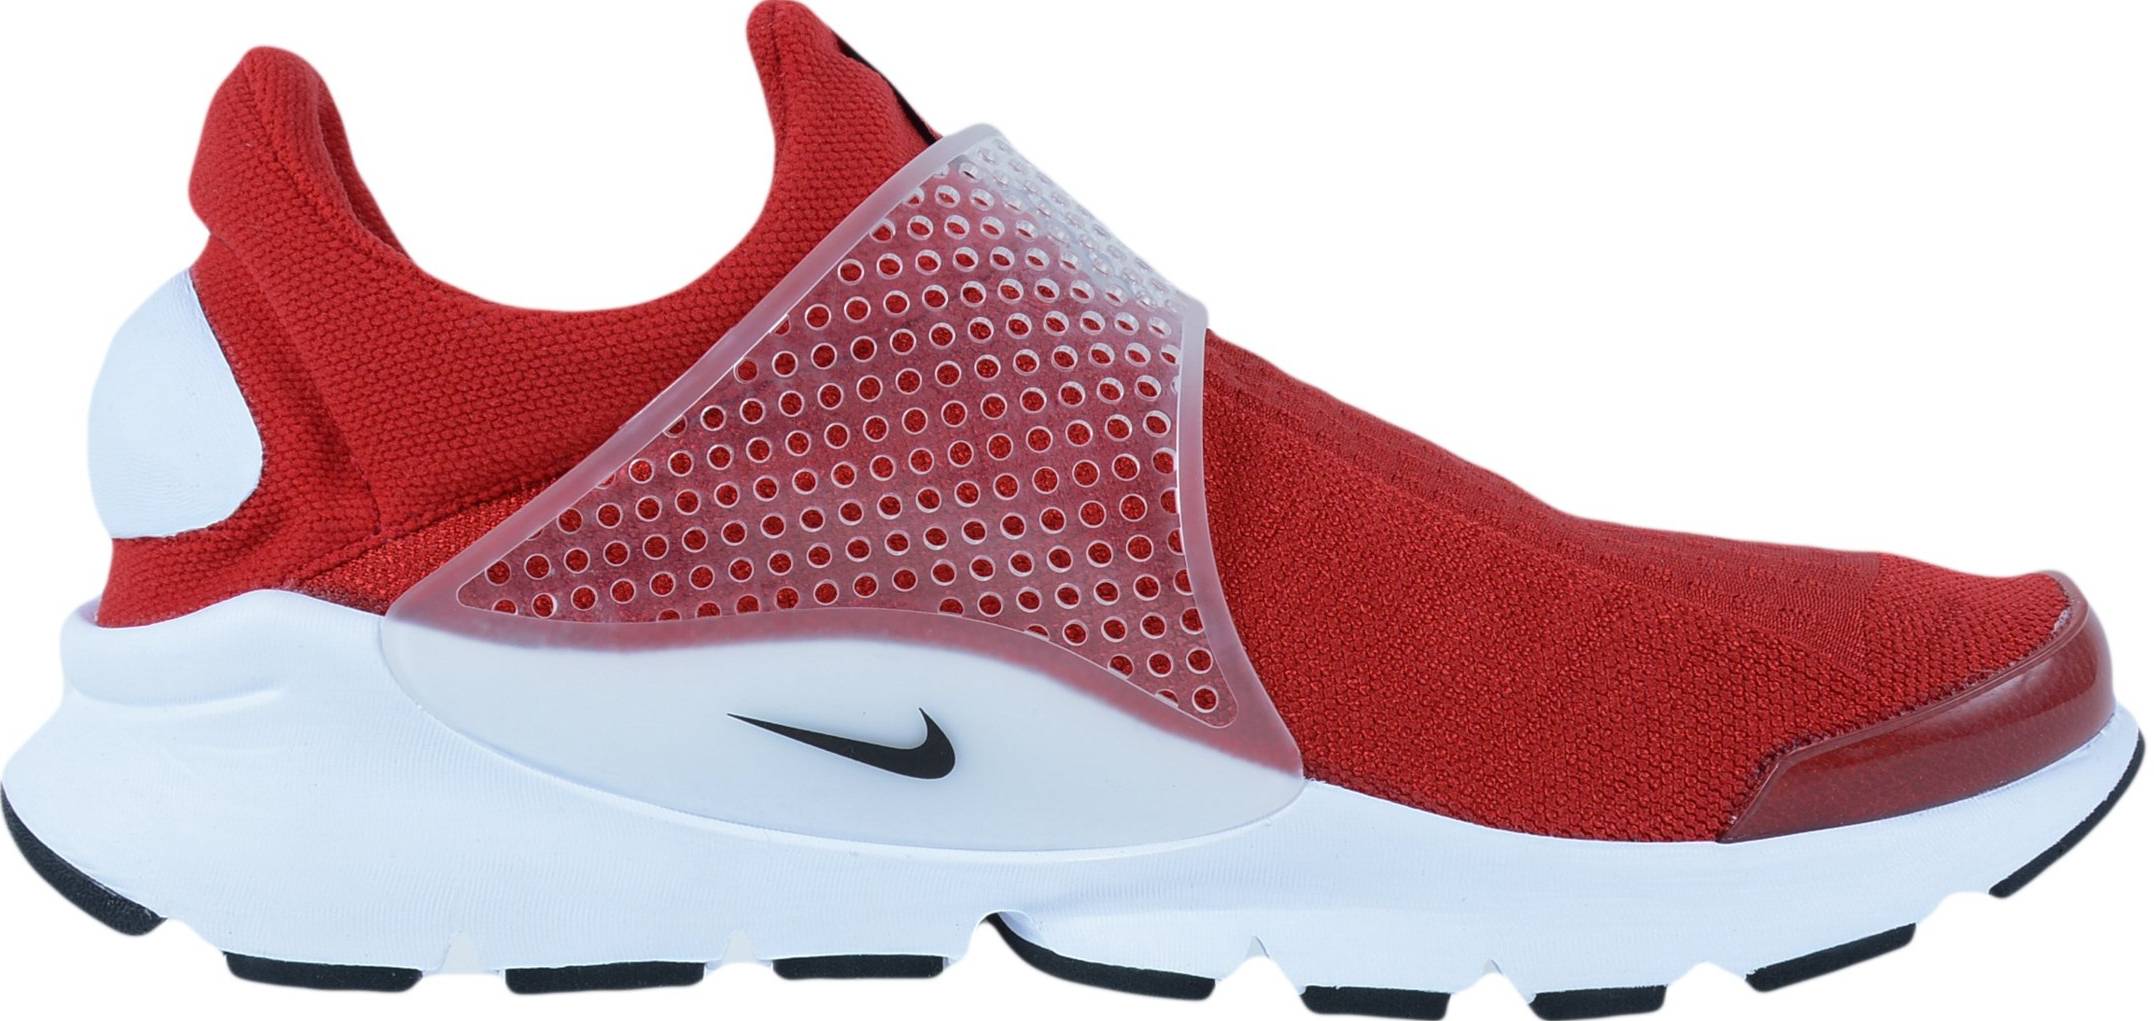 Save 30% on Red Nike Sneakers (87 